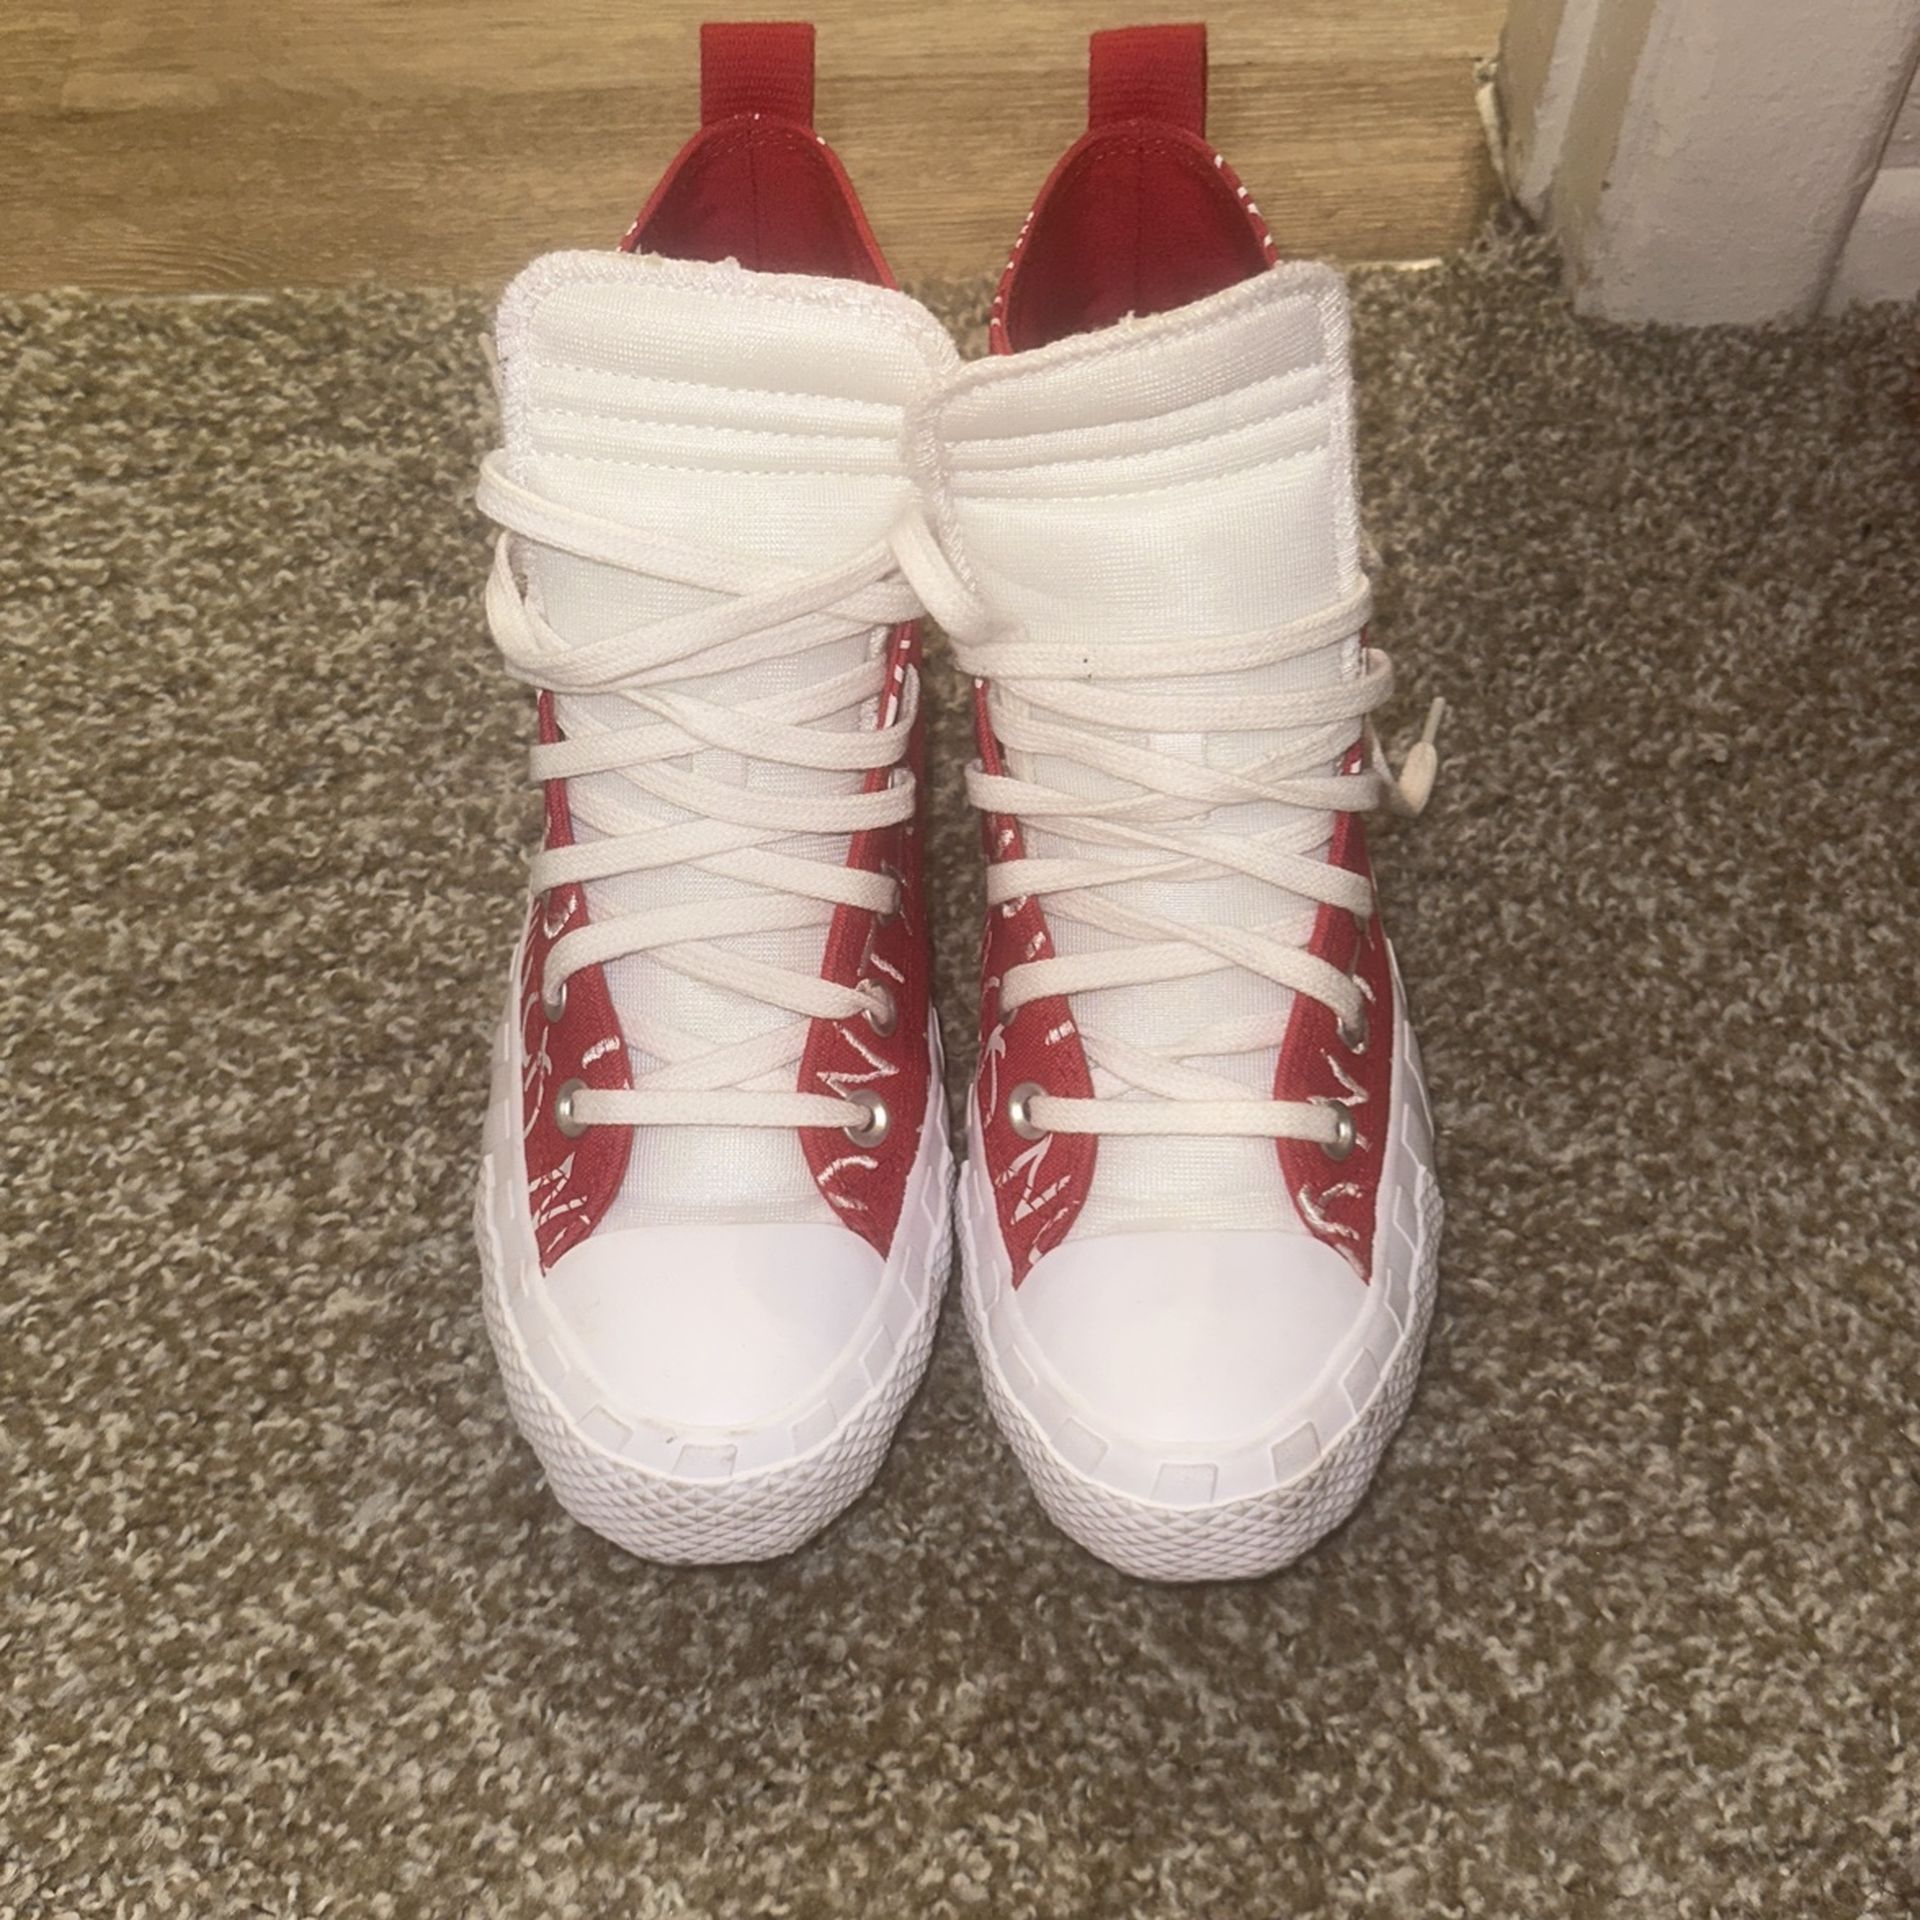 Red & White High top Converse